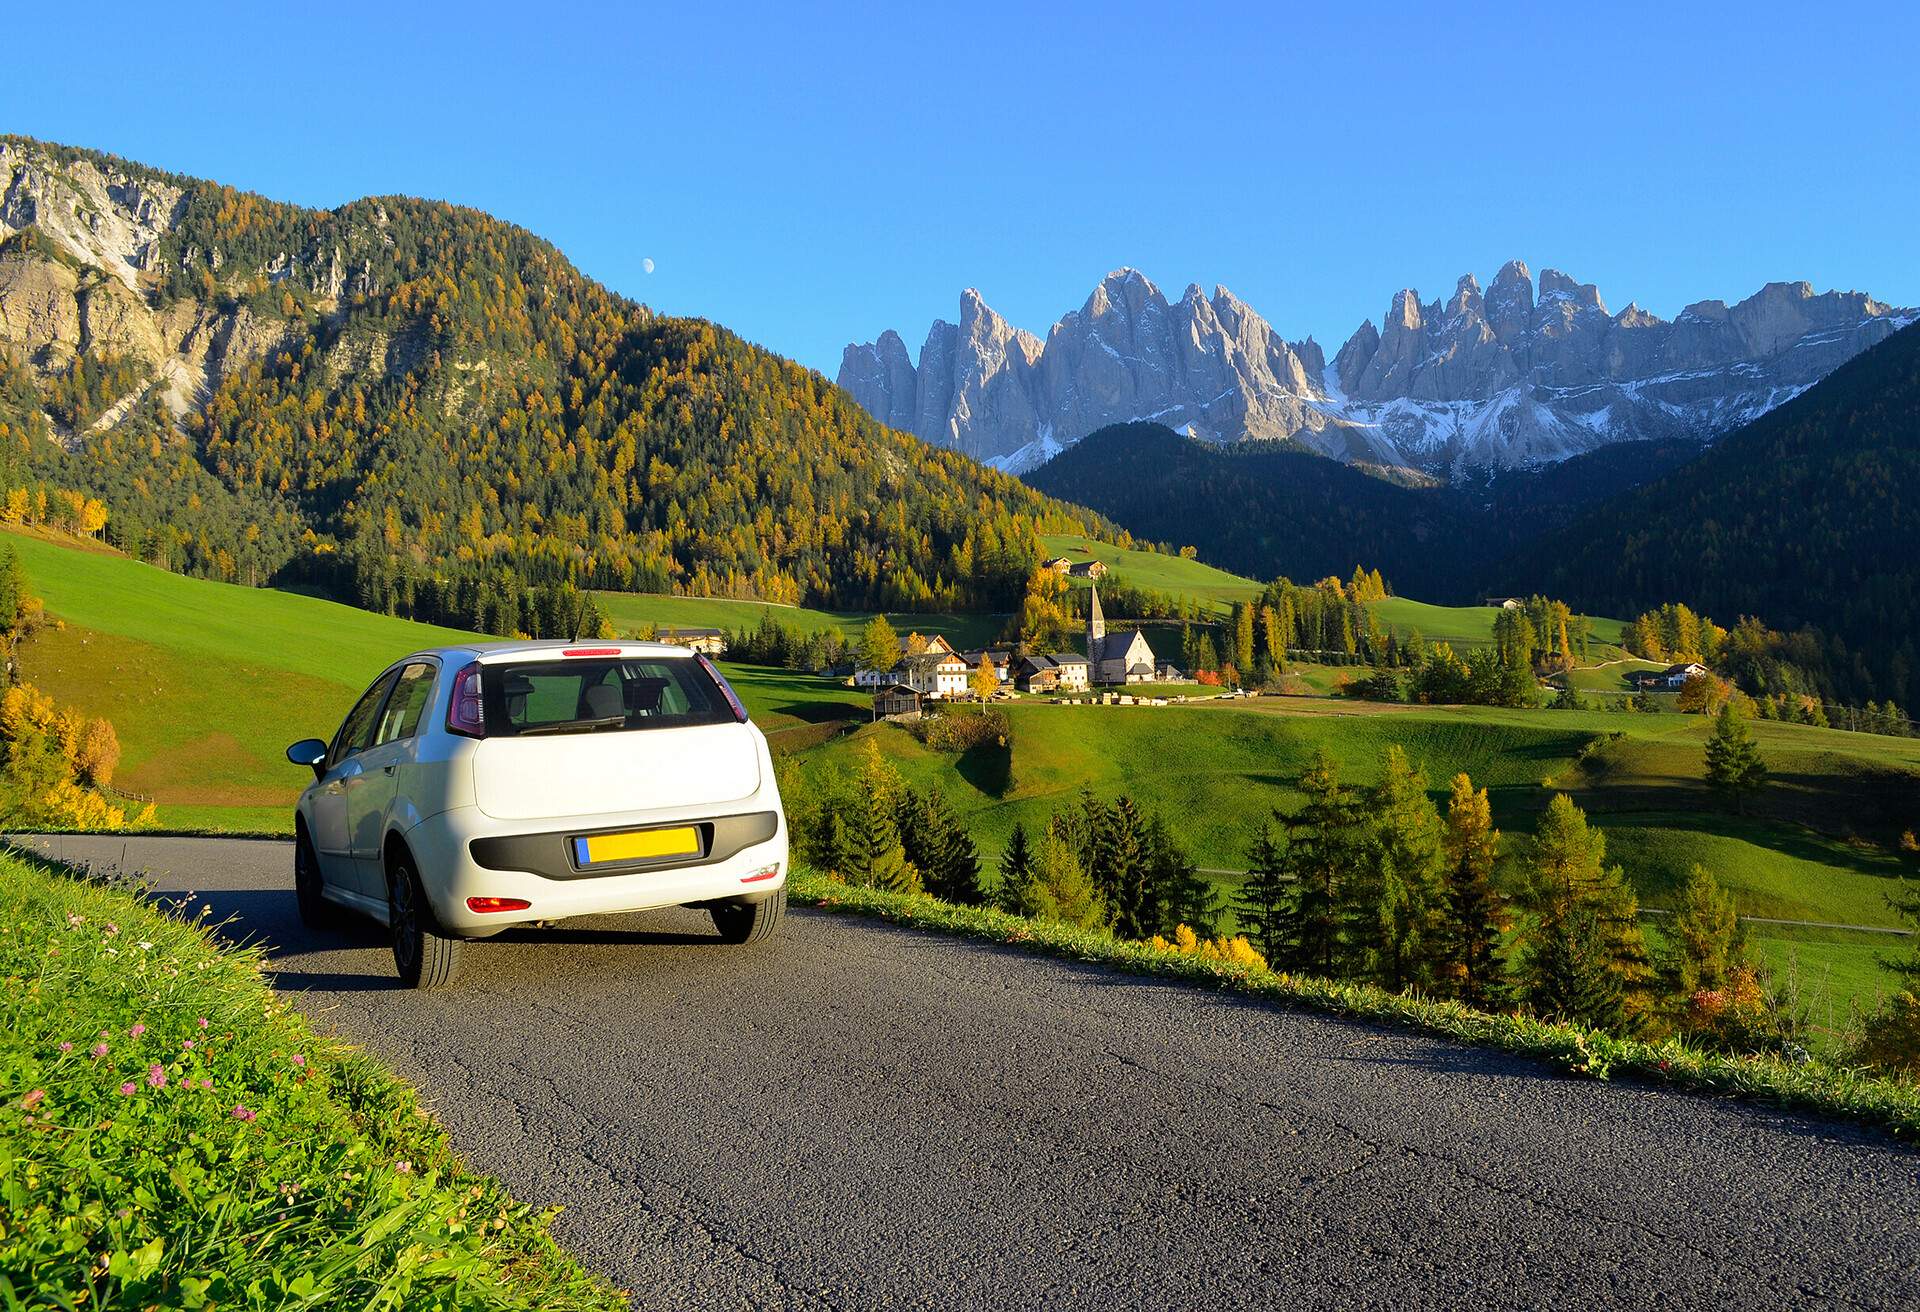 DEST_ITALY_SOUTH-TYROL_DOLOMITES_THEME_CAR_DRIVING_ROADTRIP-GettyImages-515583545